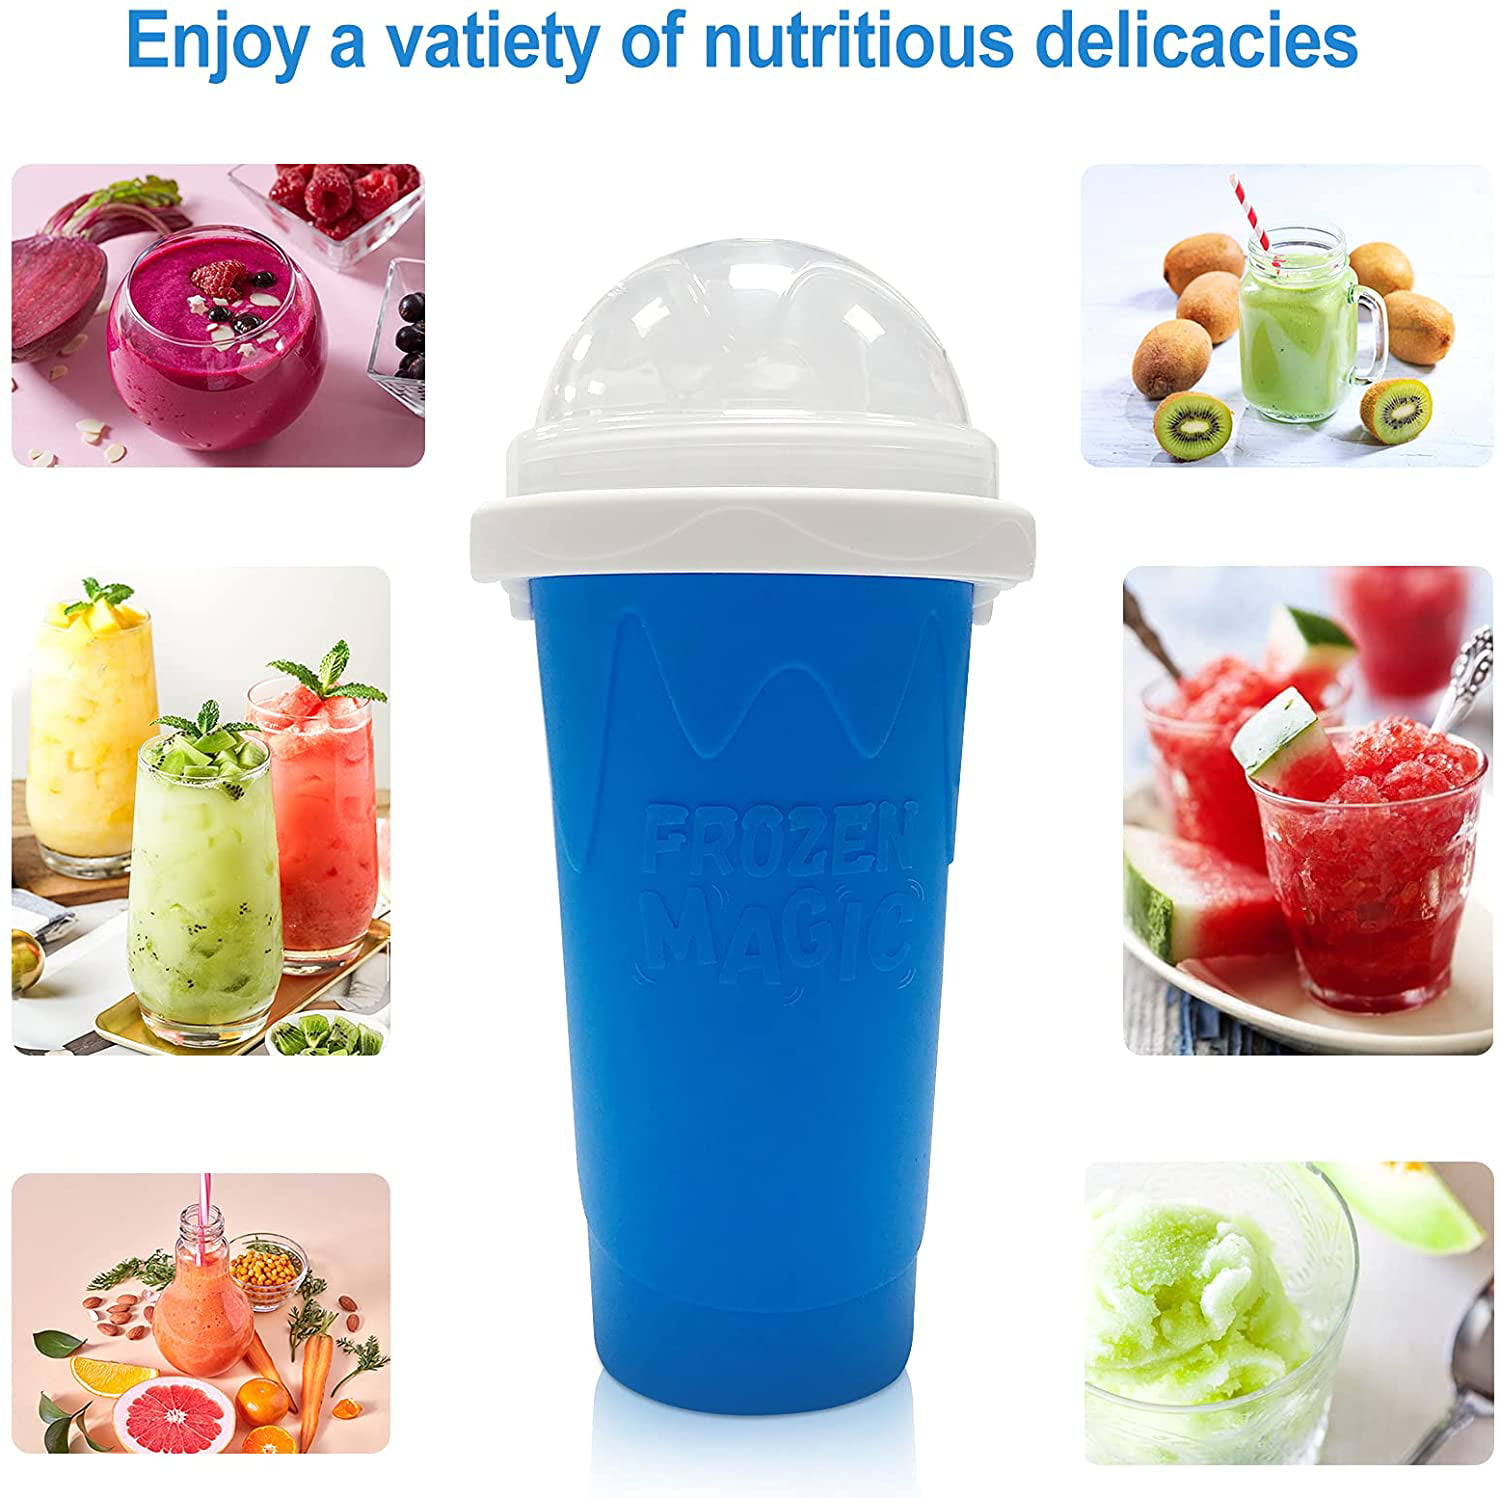 YQJY DIY Slushy Maker Cup,TIK TOK Magic Quick Frozen Smoothies Cup,Cooling Cup Double Layer 2 in 1 Squeeze Cup Slushy Maker,Homemade Milk Shake Ice Cream Maker DIY it for Kids and Family,Blue